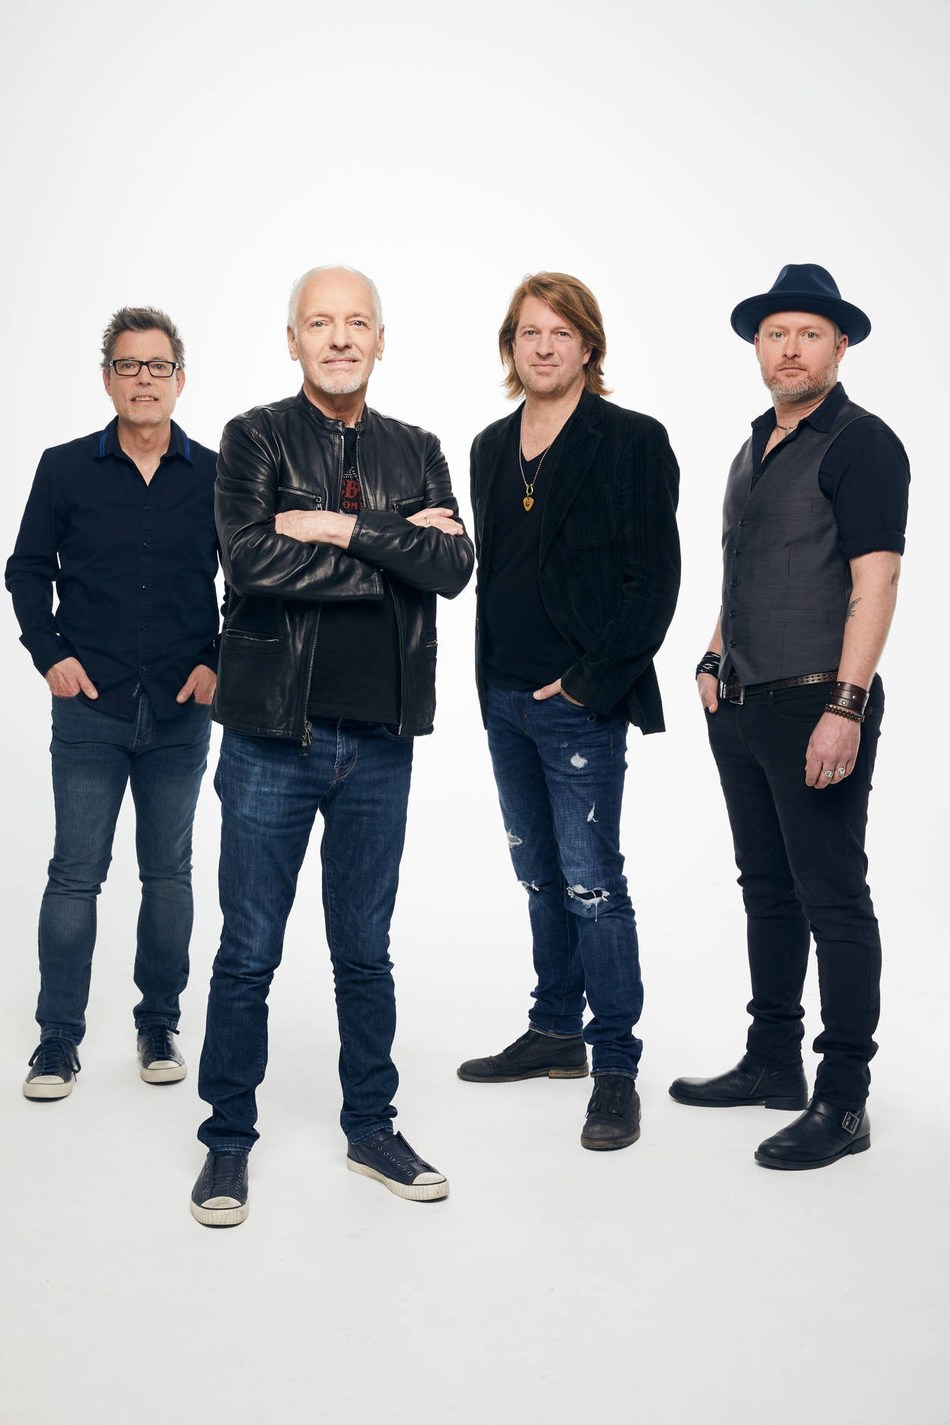 The Peter Frampton Band's new album 'All Blues' will be released June 7 via UMe.